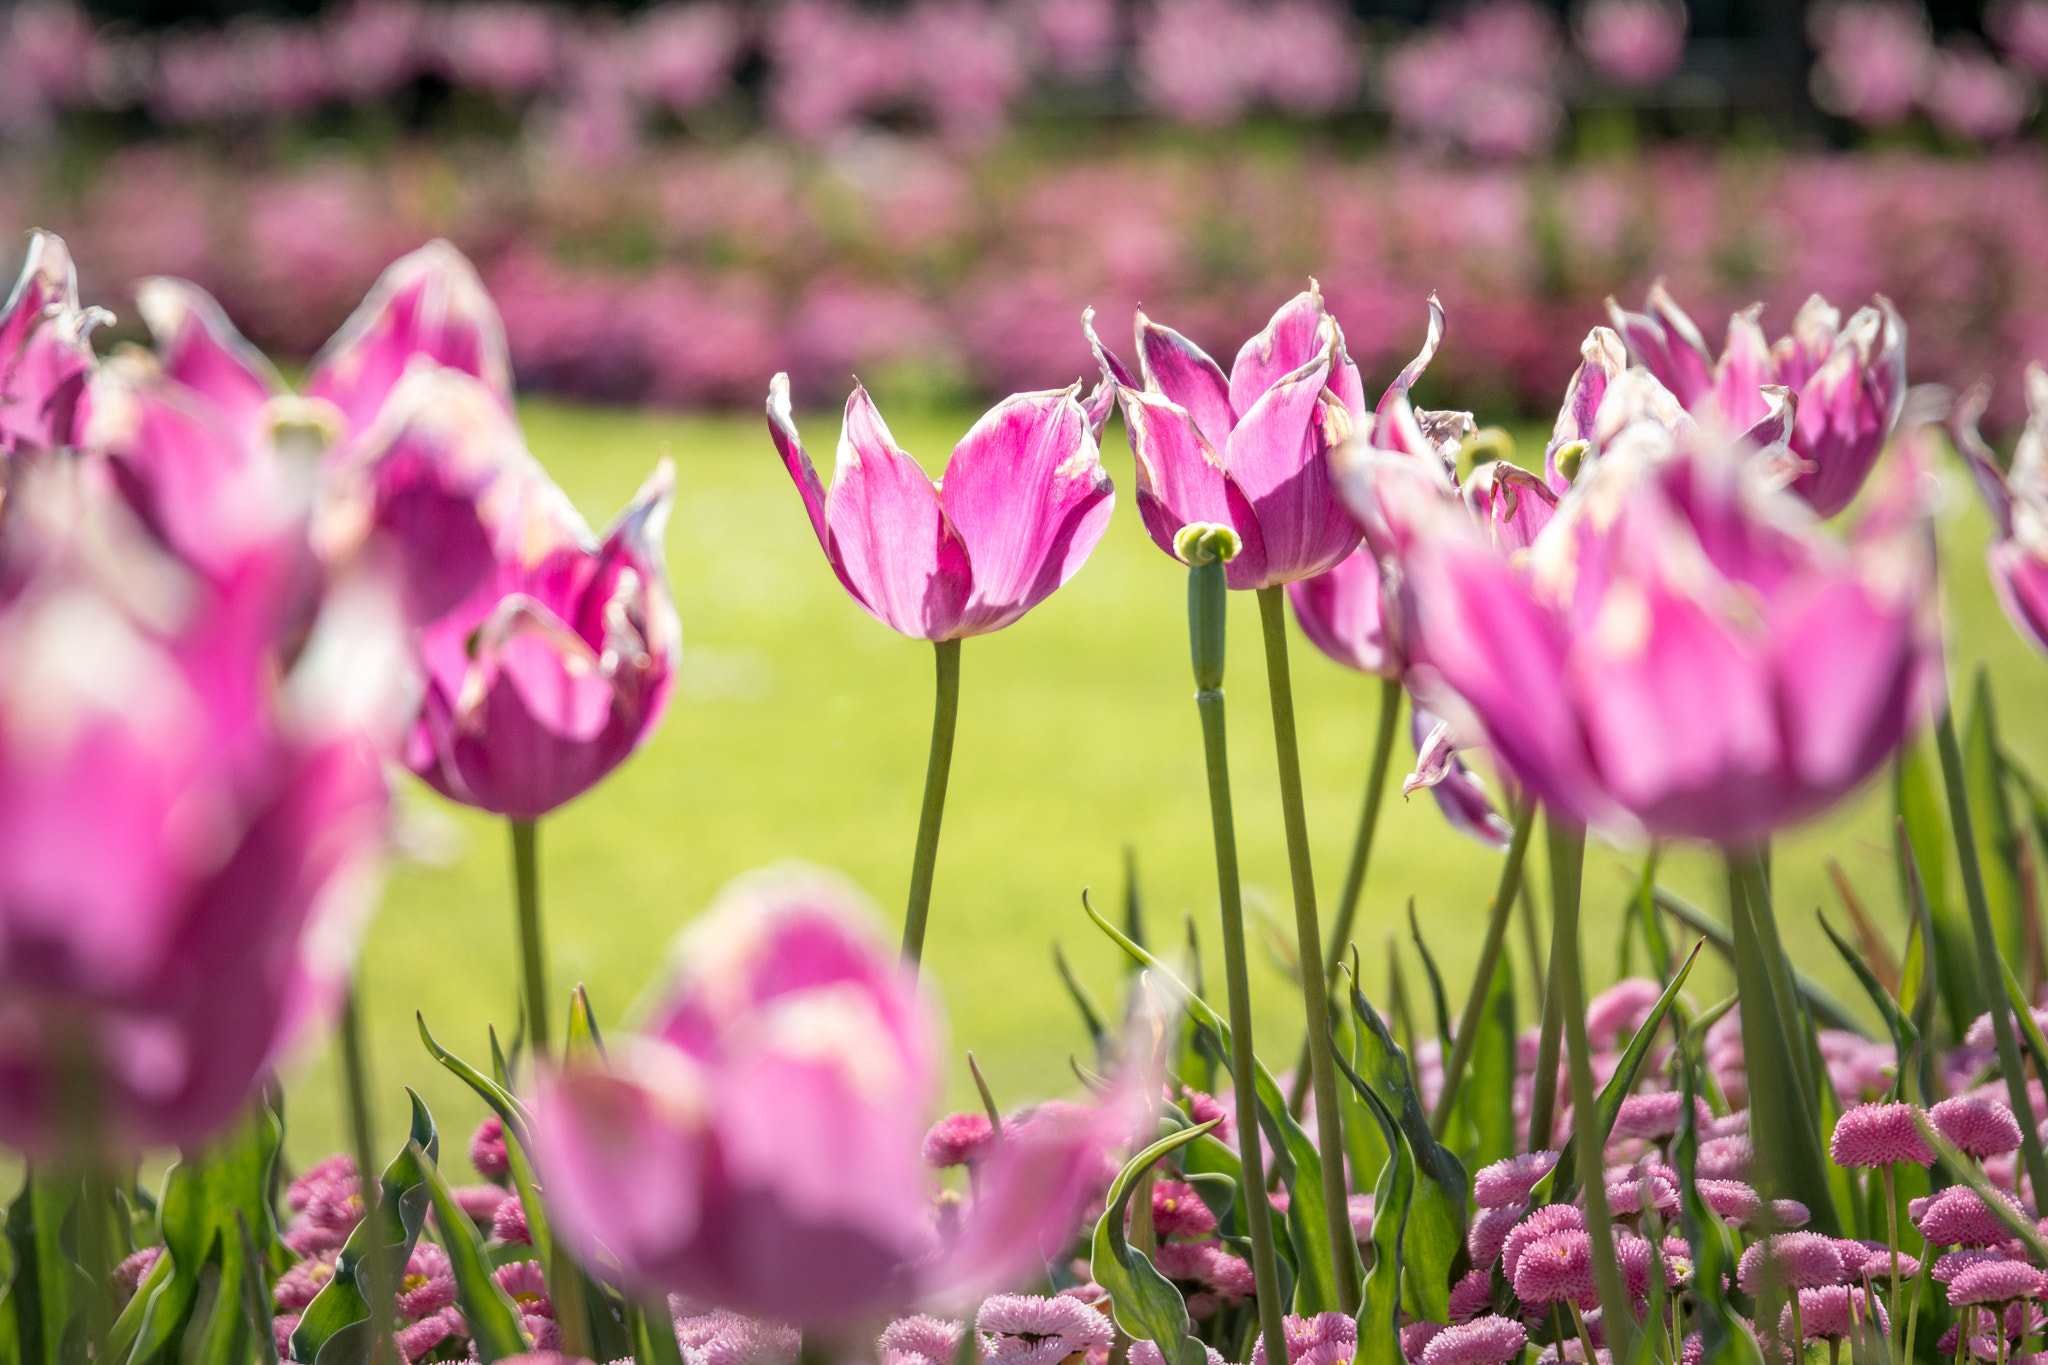 Canon EOS 70D + Sigma 24-105mm f/4 DG OS HSM | A sample photo. Field of tulips photography